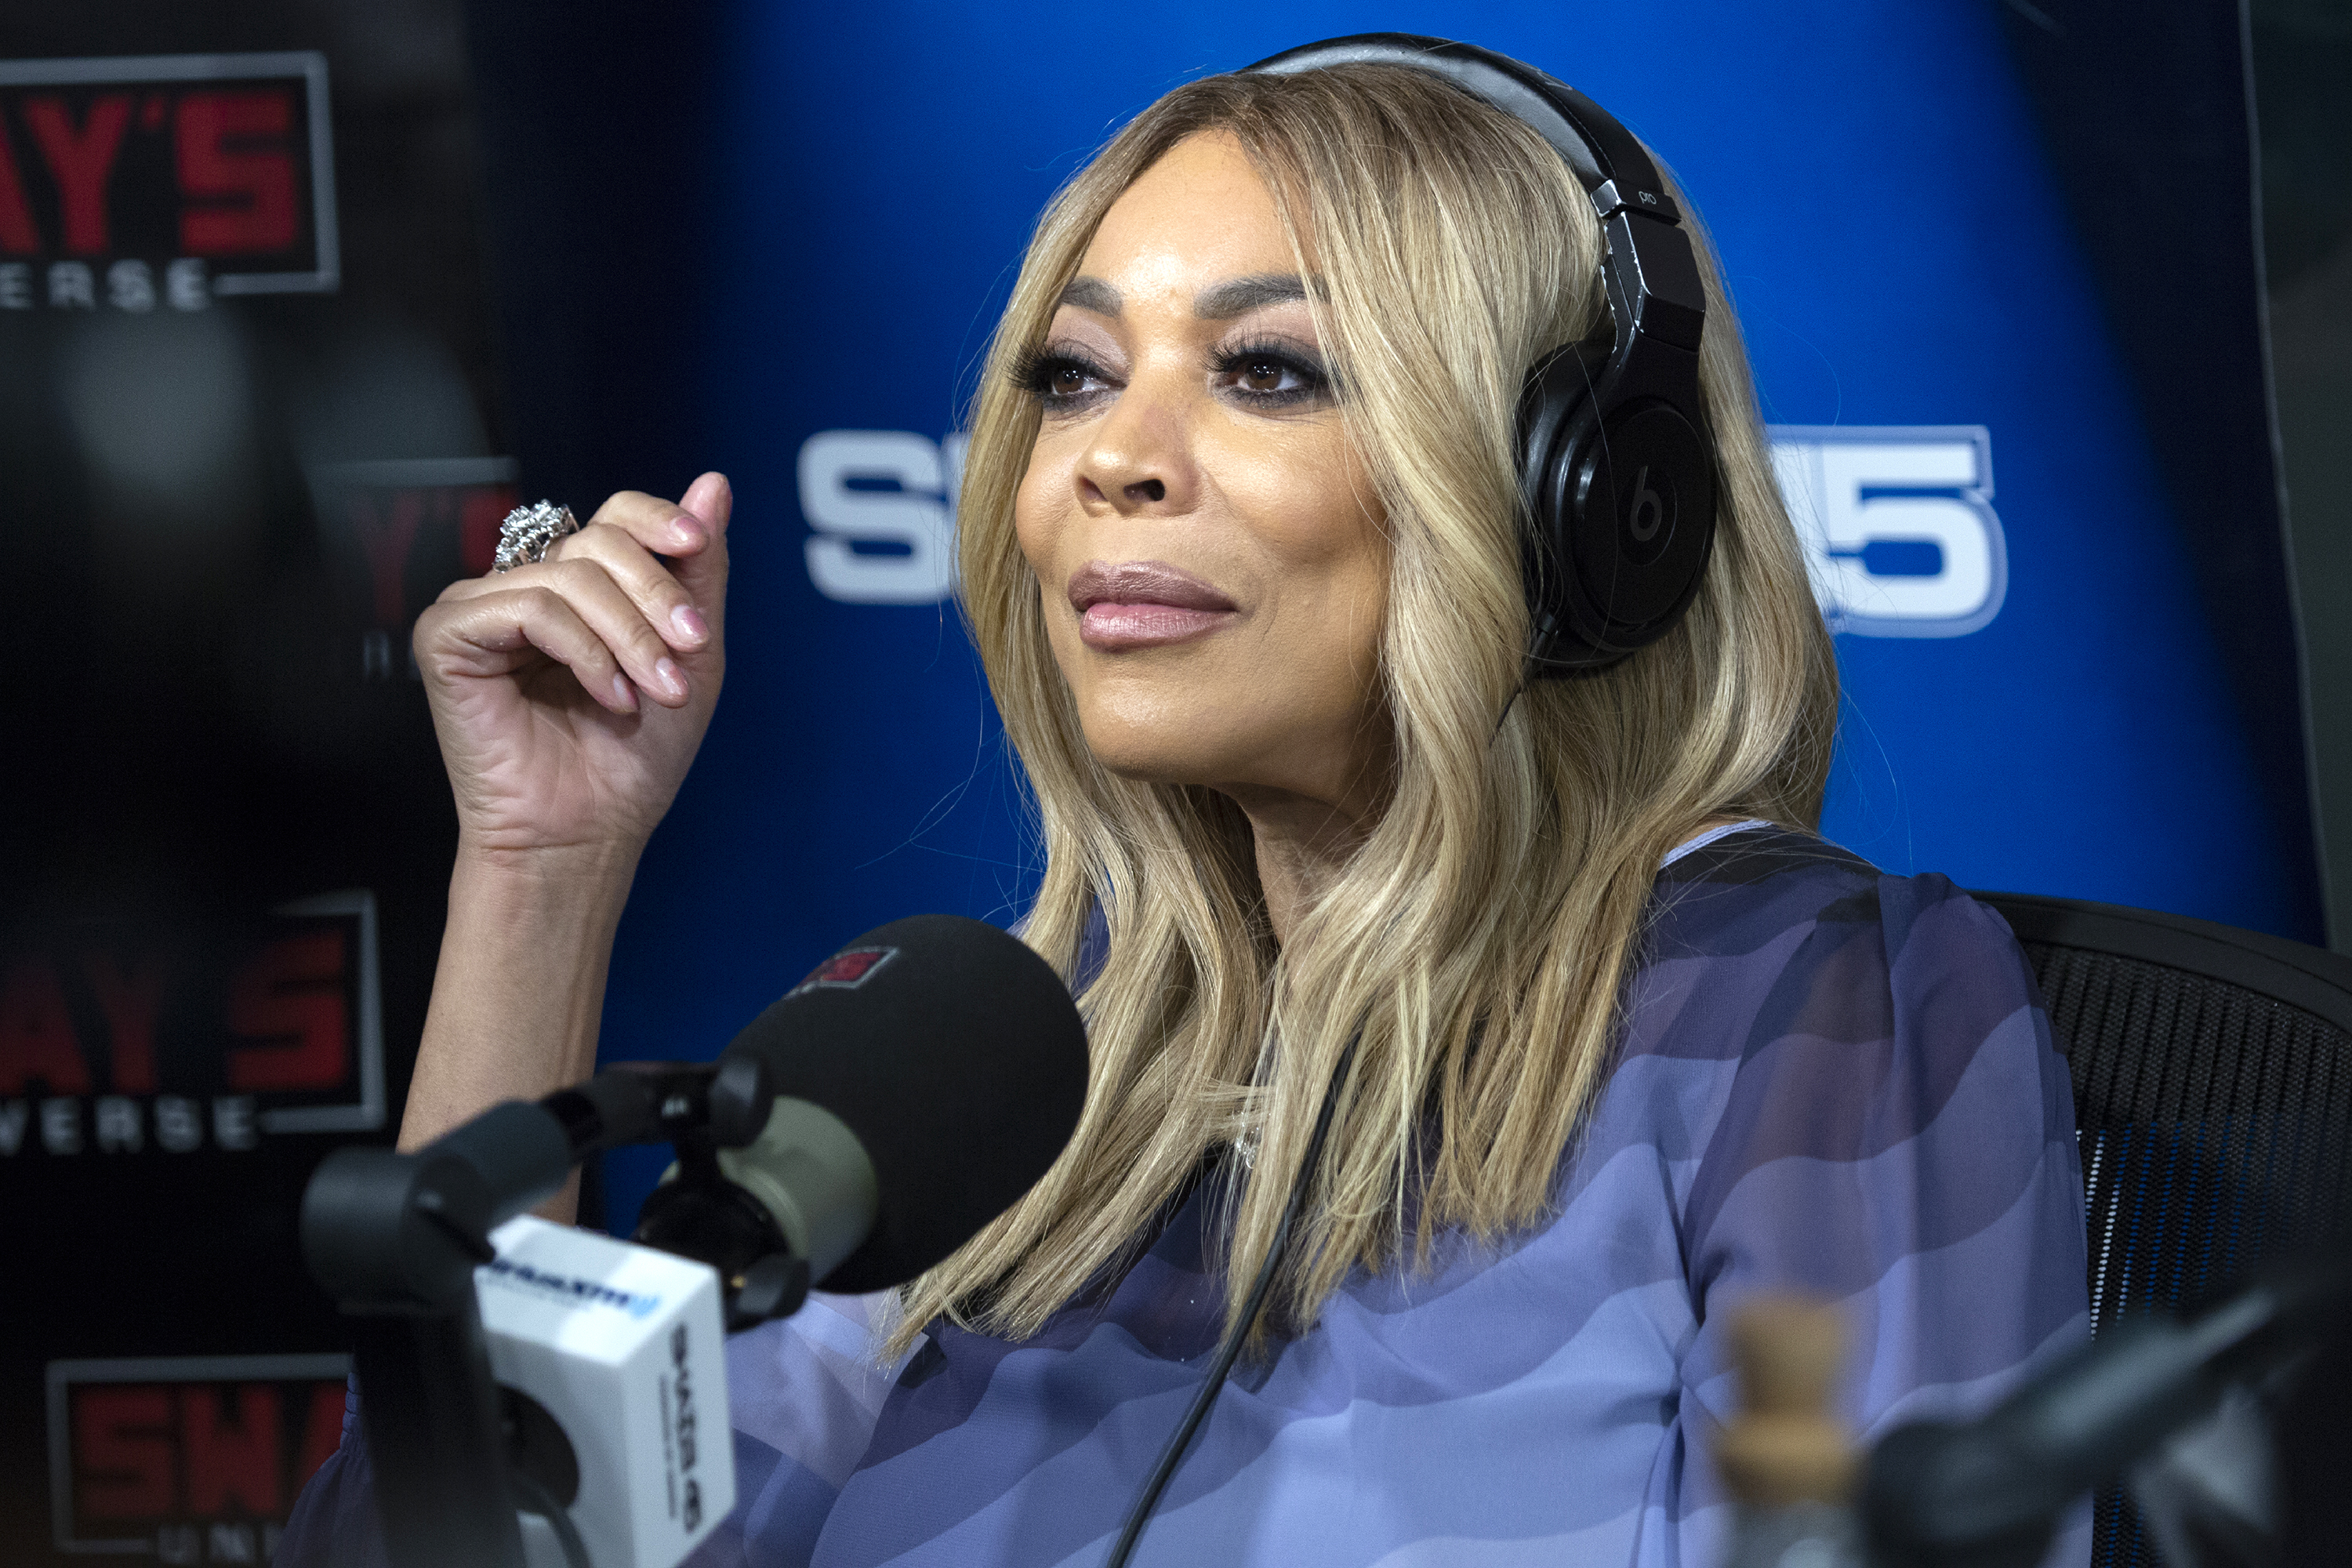 Wendy Williams in a radio studio, wearing headphones, speaking into a mic, styled in a striped garment